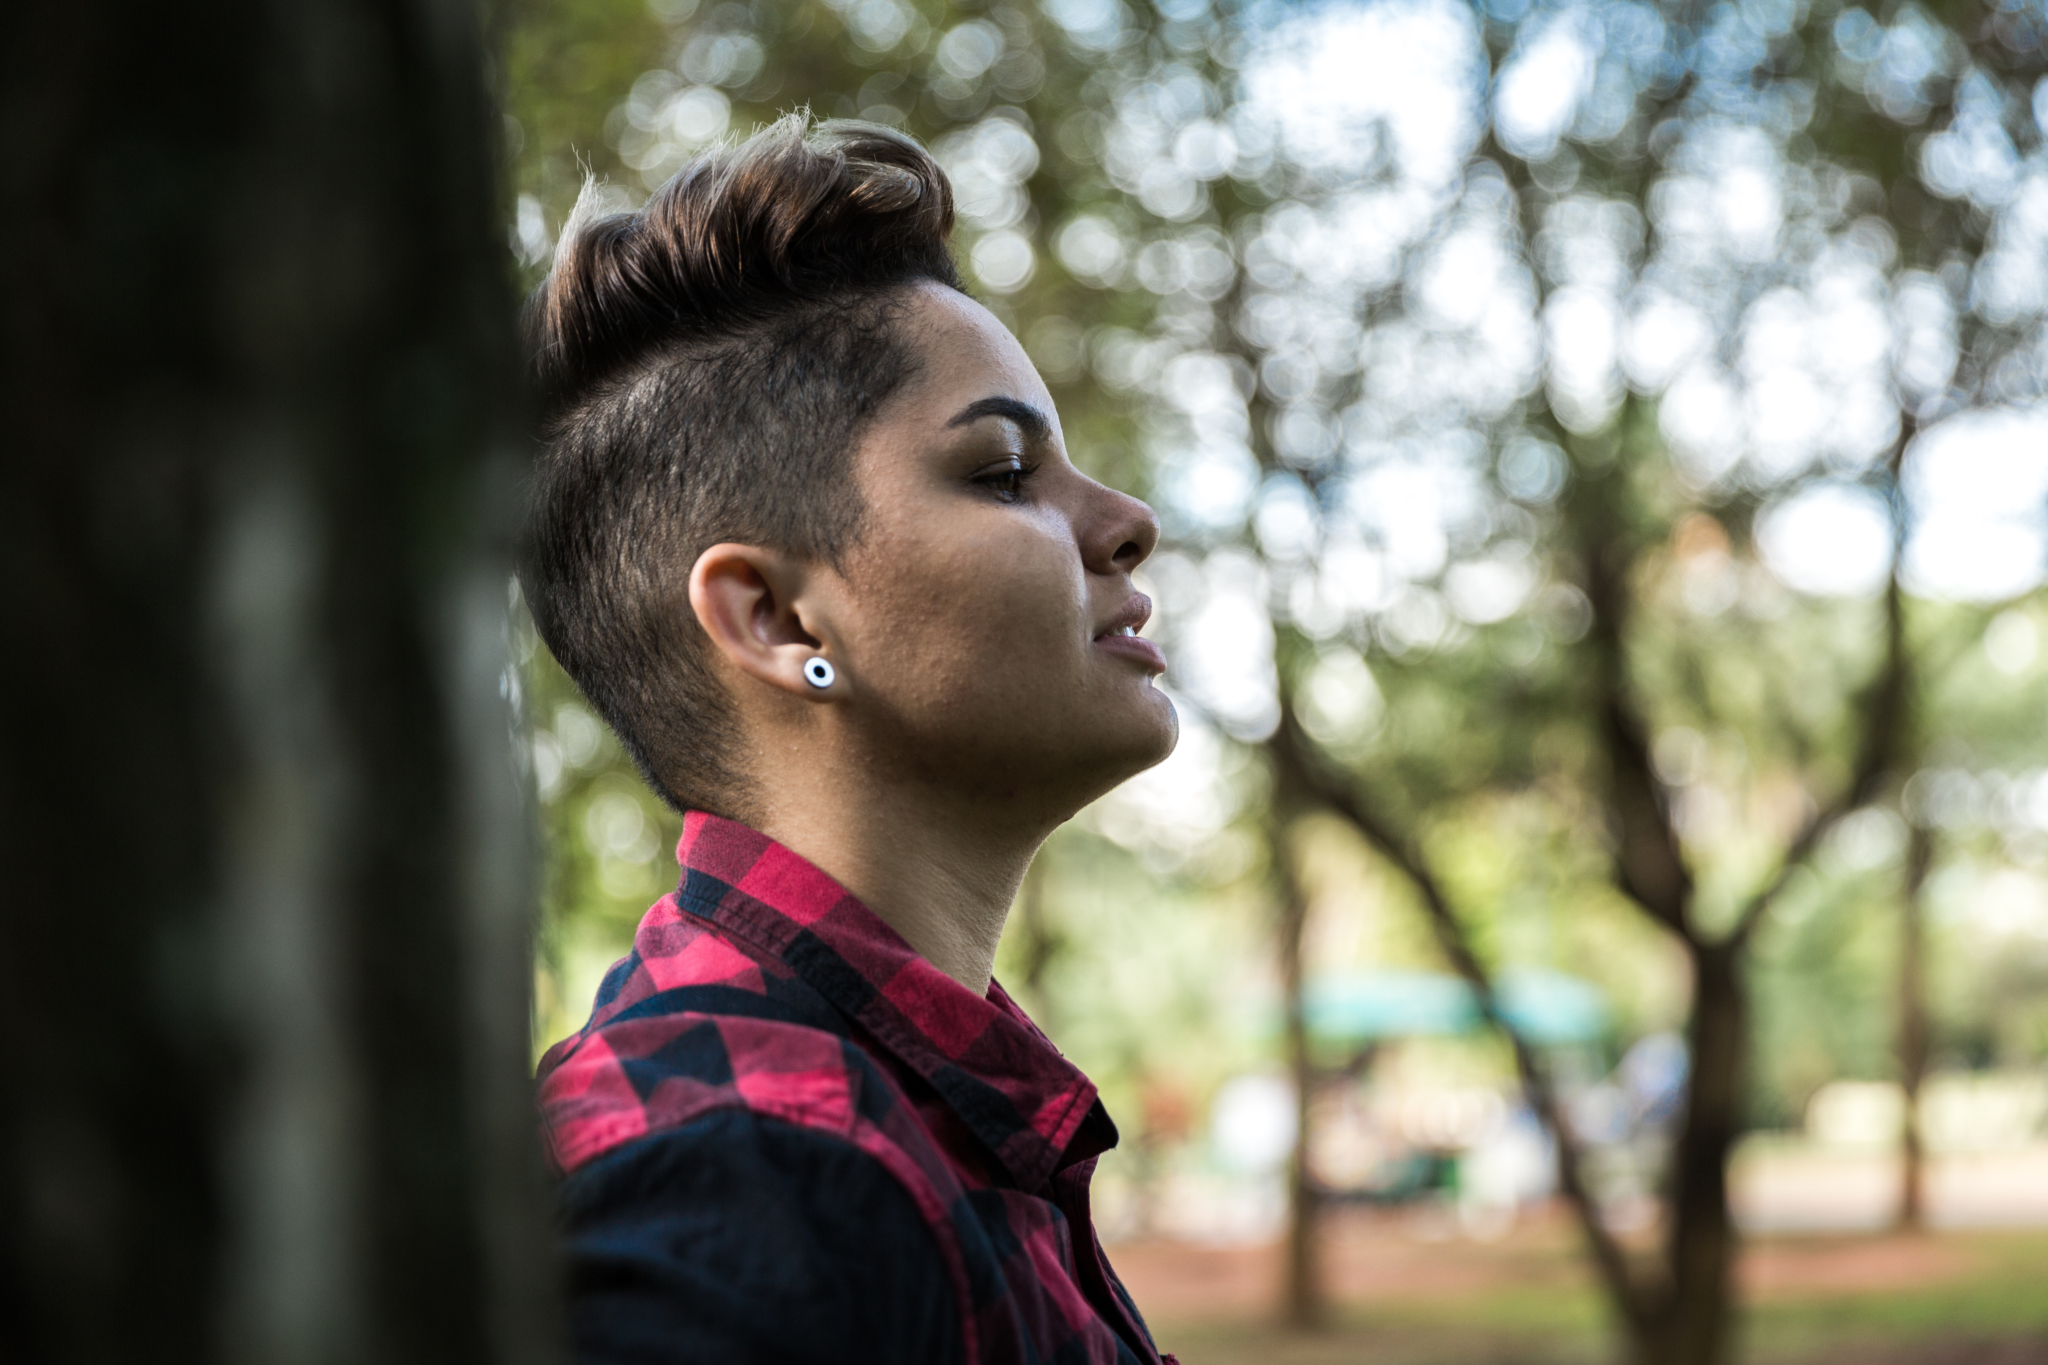 Close up portrait of a young person leaning up against a fence. They have a short, trendy haircut and prominent earrings.